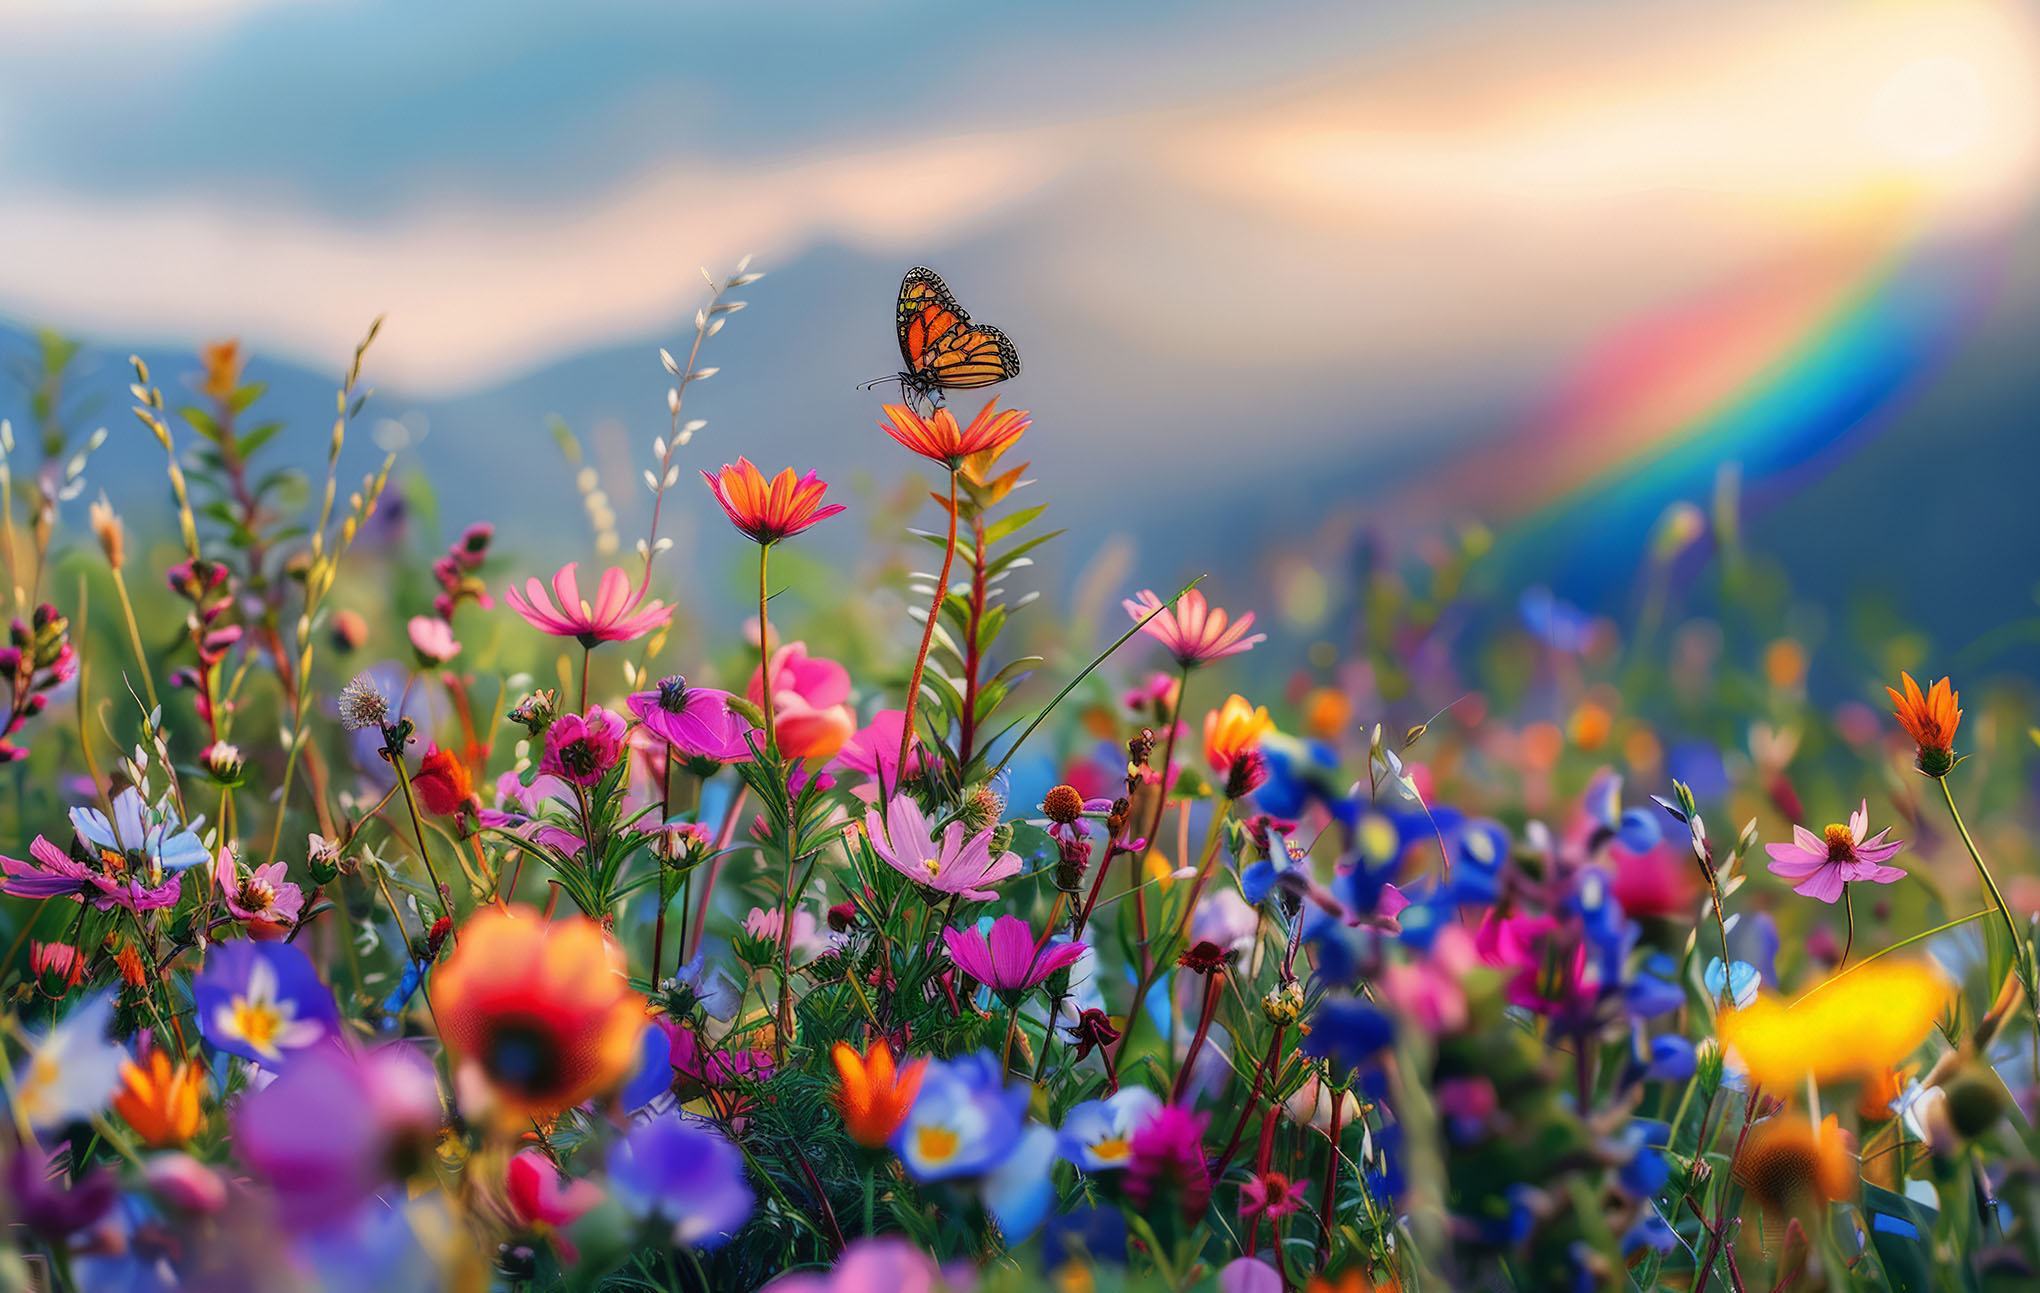 A vibrant field of multicolored wildflowers with a butterfly perched on one, under a soft sunset sky featuring a radiant rainbow stretching across the background.